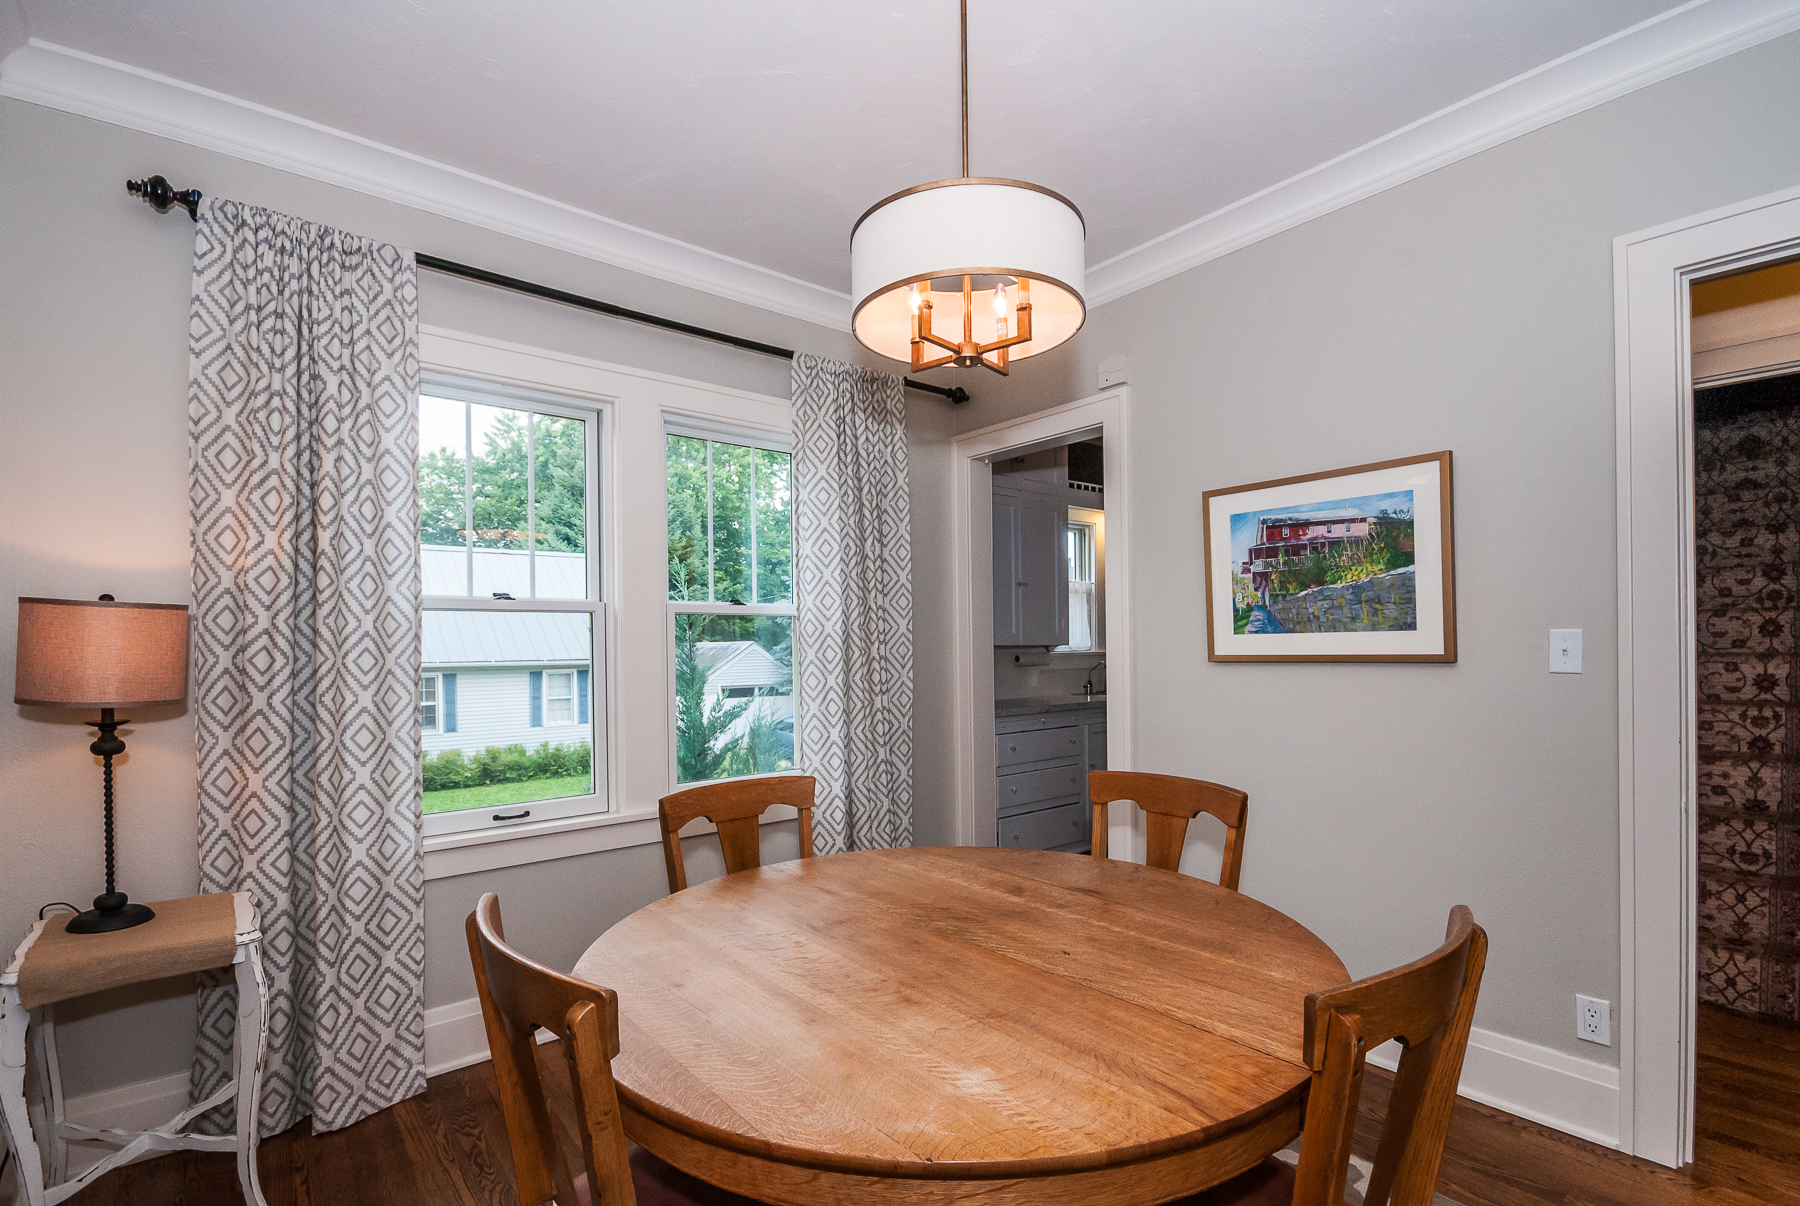 Main floor: Dining room with great natural light